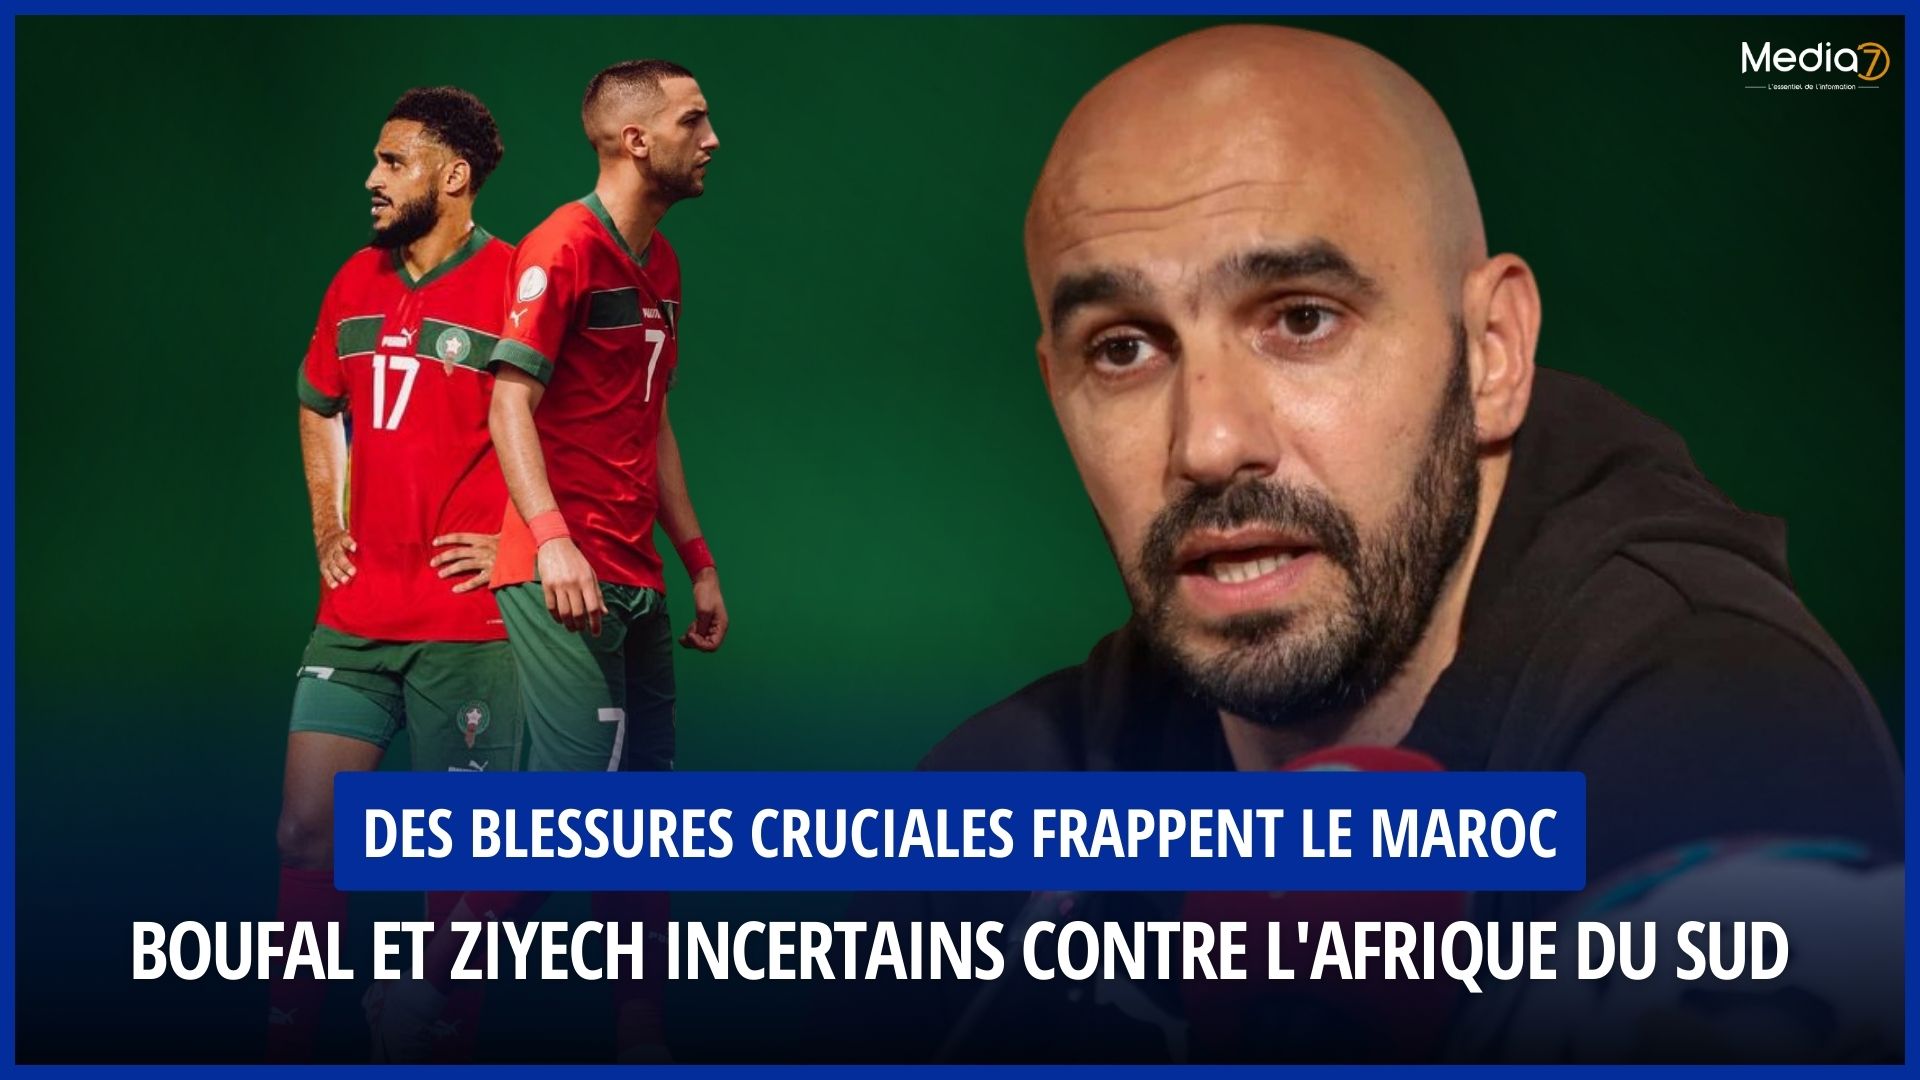 Crucial Injuries Hit Morocco: Boufal and Ziyech Doubtful for Match Against South Africa - Media7